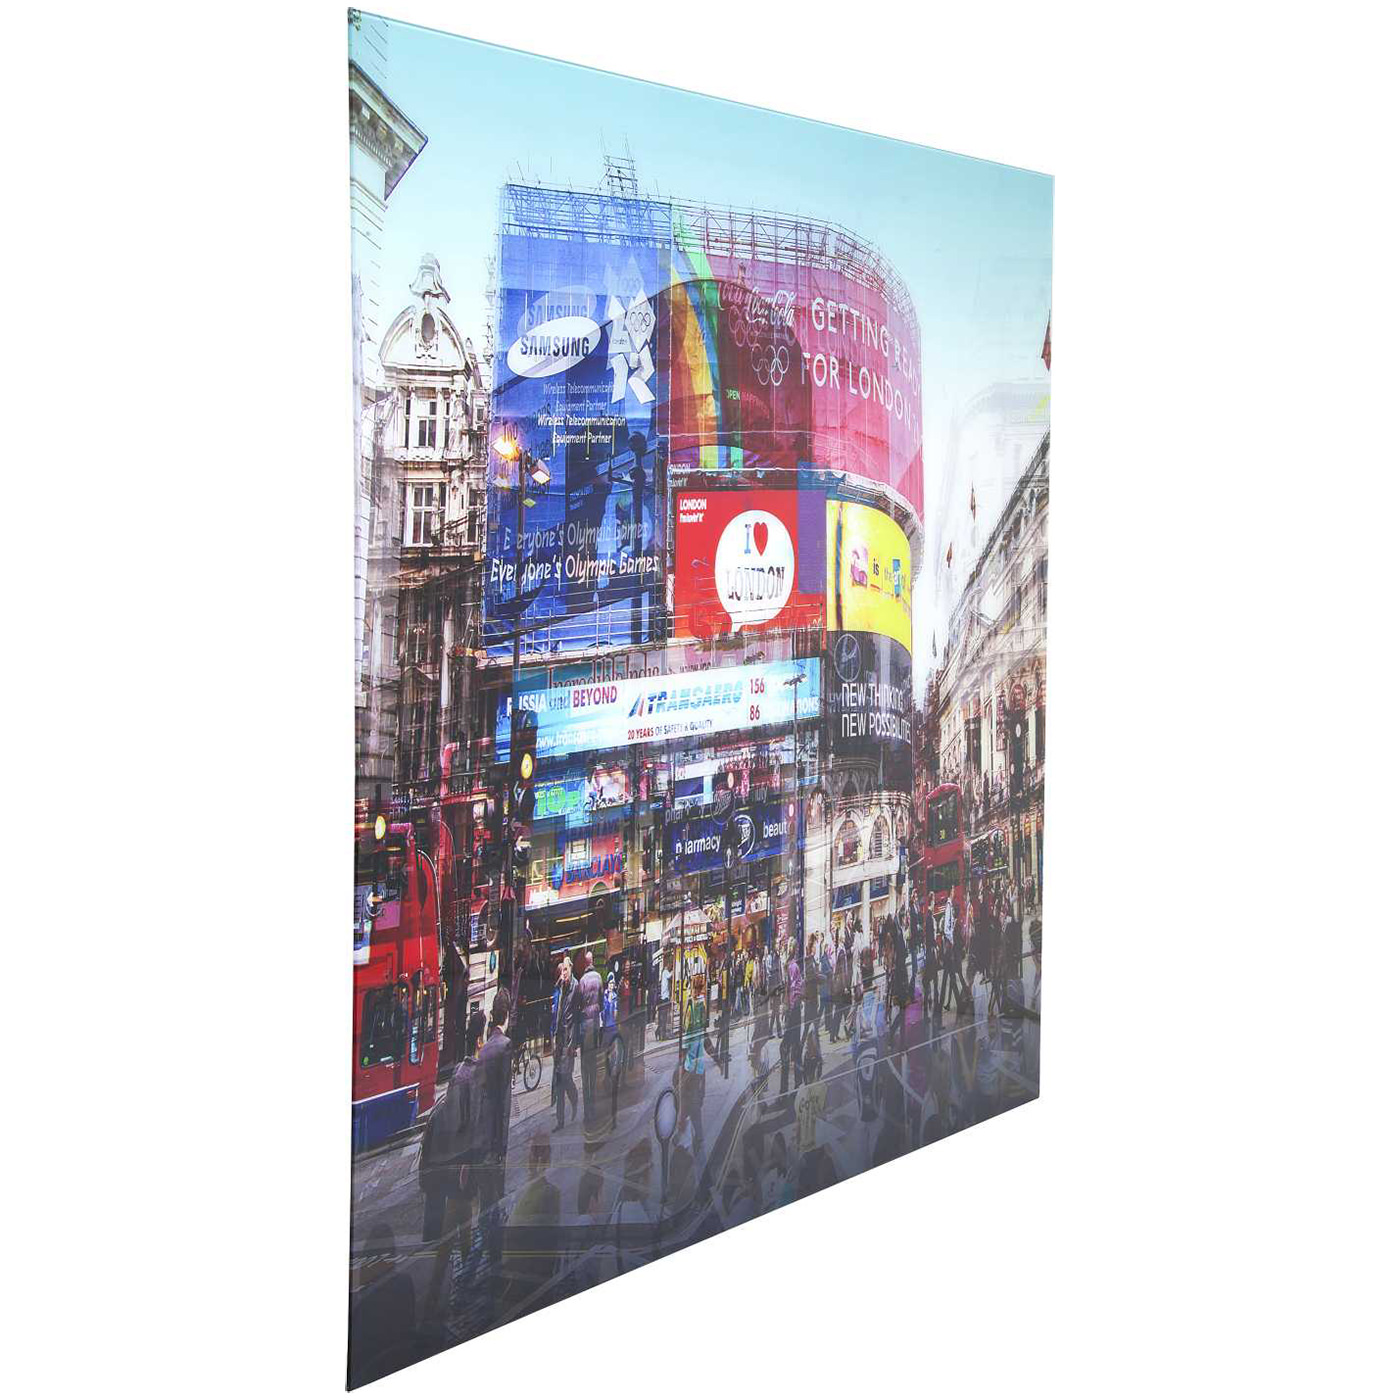 8 1353 140 6 – Picture Glass Piccadilly Circus 120x160cm (2)